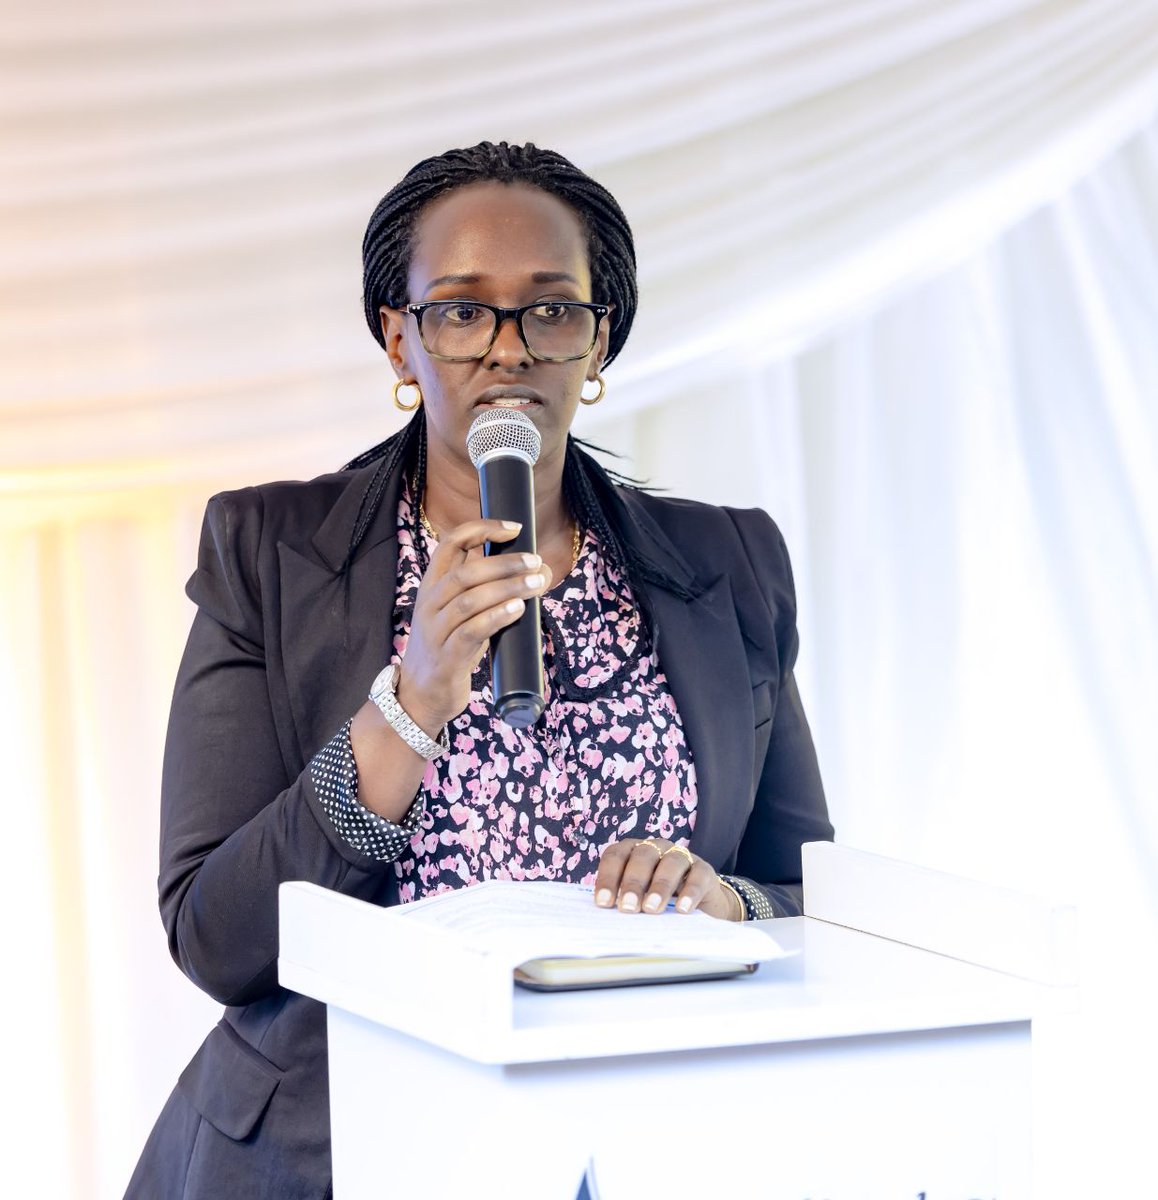 In her address, the Executive Director of Memory and Genocide Prevention, @Vingabire07, emphasized the critical need to combat hate speech and genocide denial, urging collective action to ensure 'Never Again' becomes a reality.

#Kwibuka30